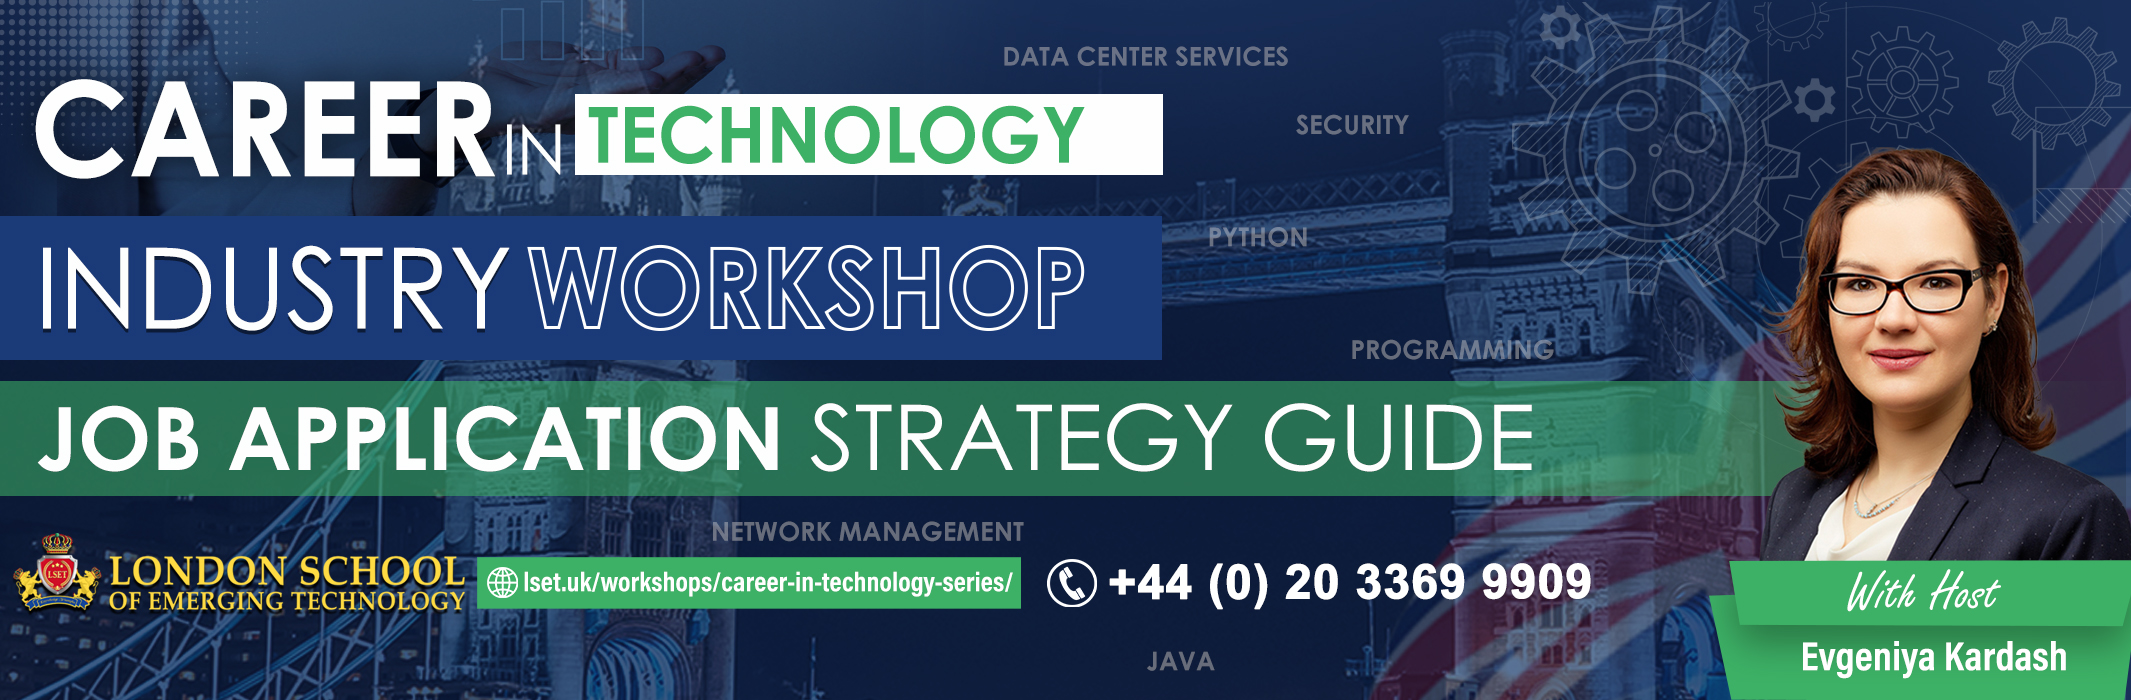 London School of Emerging Technology (LSET) has successfully organised a Job Application Strategy Workshop.